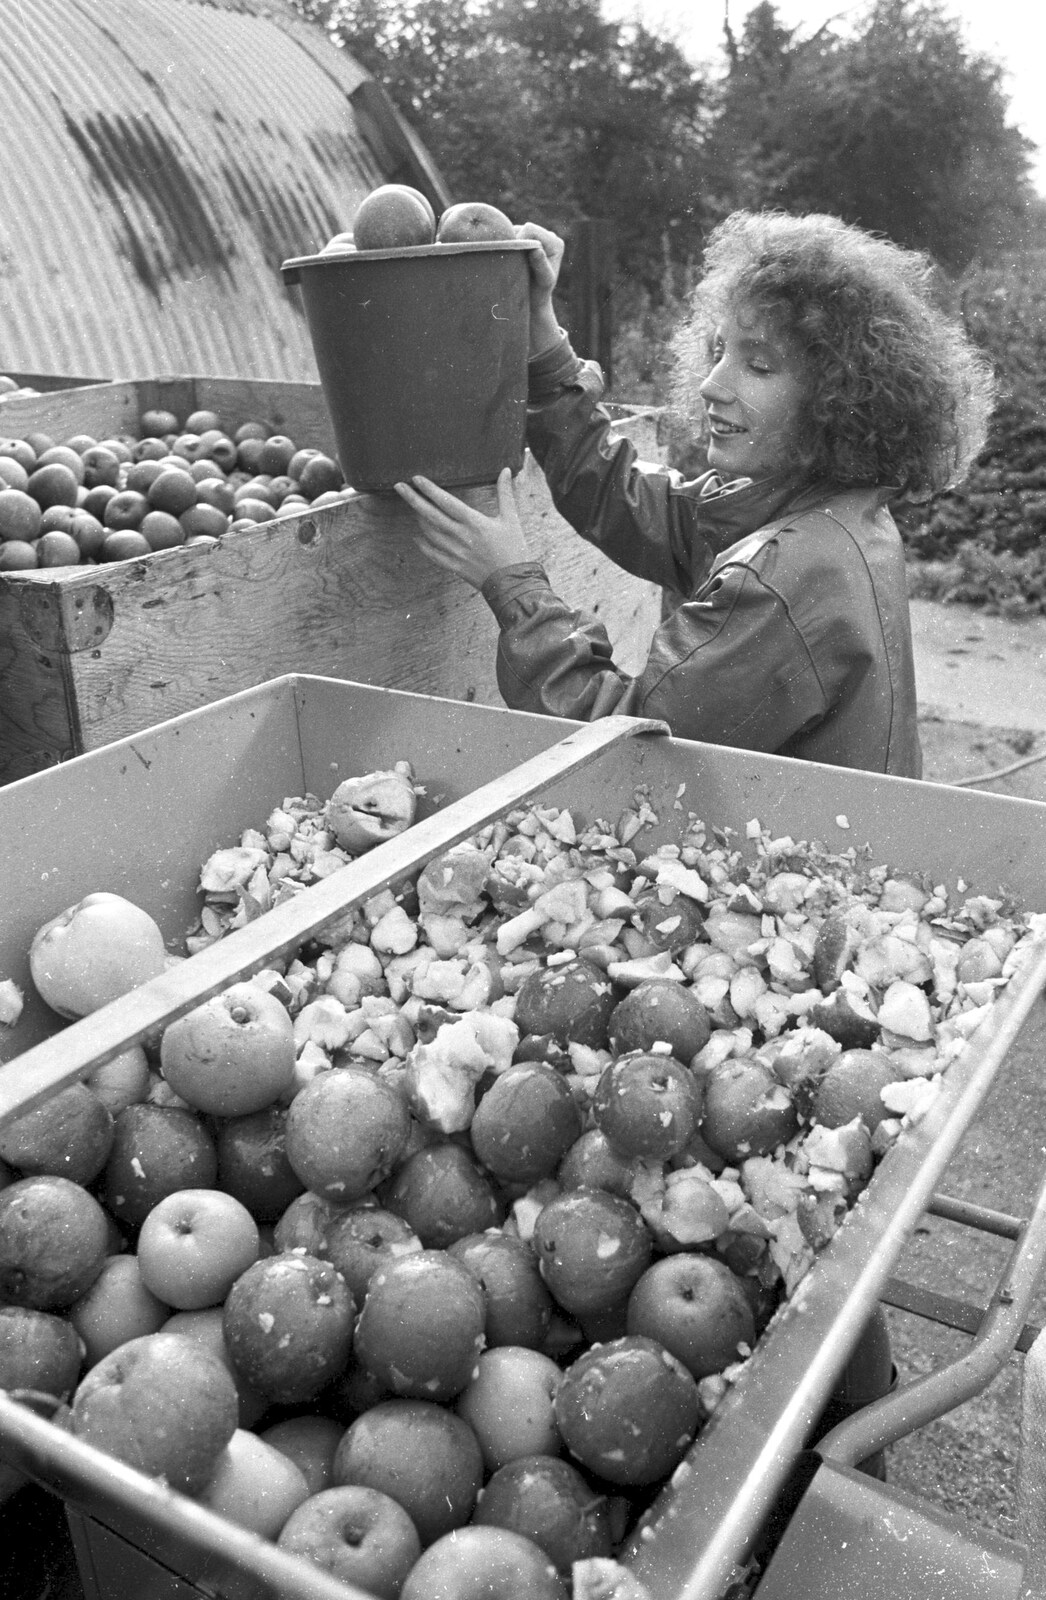 Monique loads up some apples from Cider Making in Black and White, Stuston, Suffolk - 11th October 1992